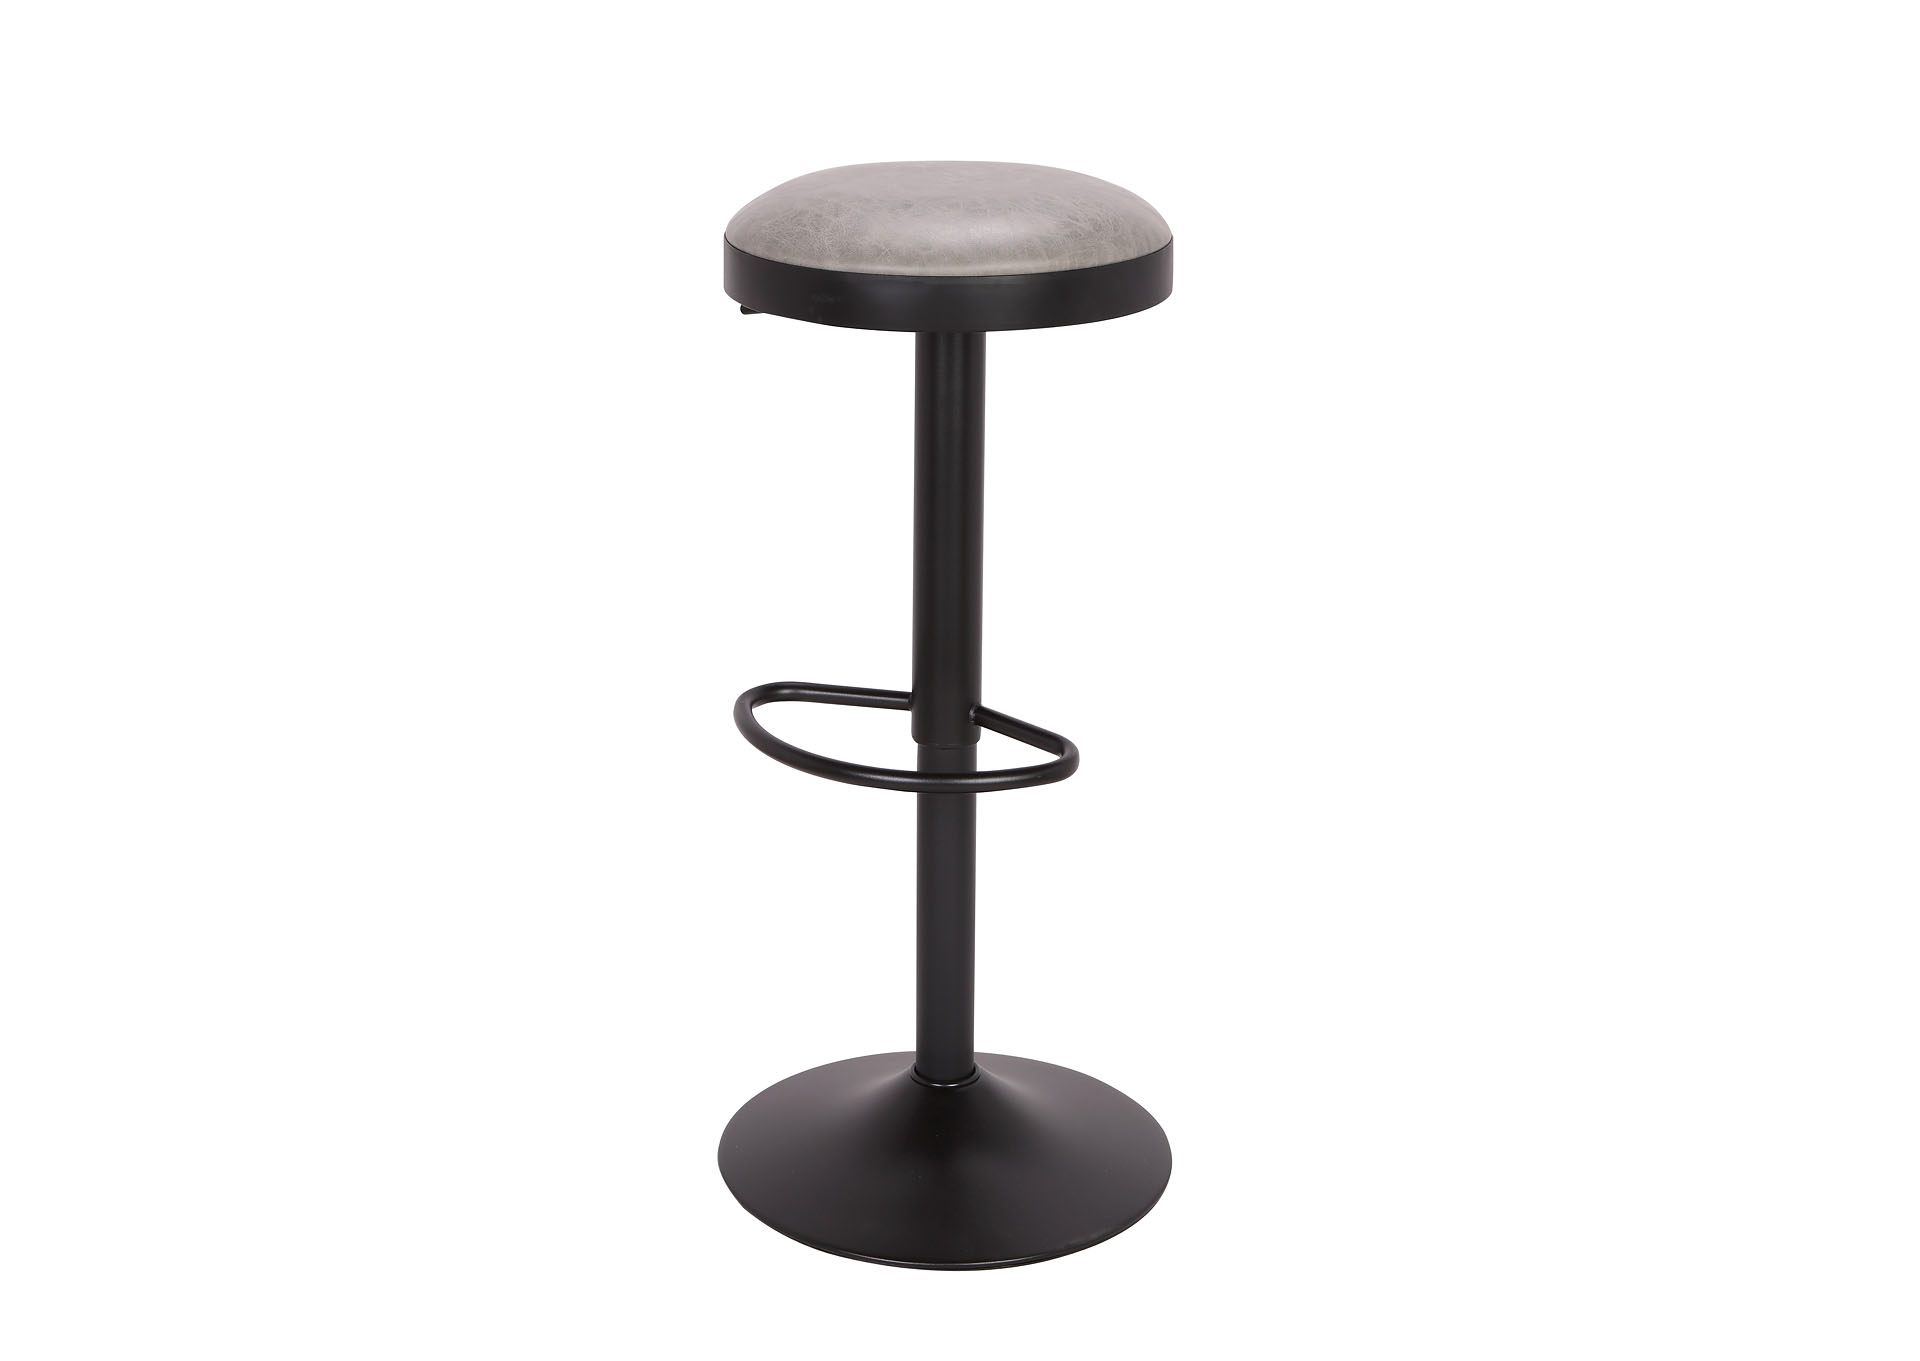 Matte Black Vintage Style Backless Adjustable Stool,Chintaly Imports